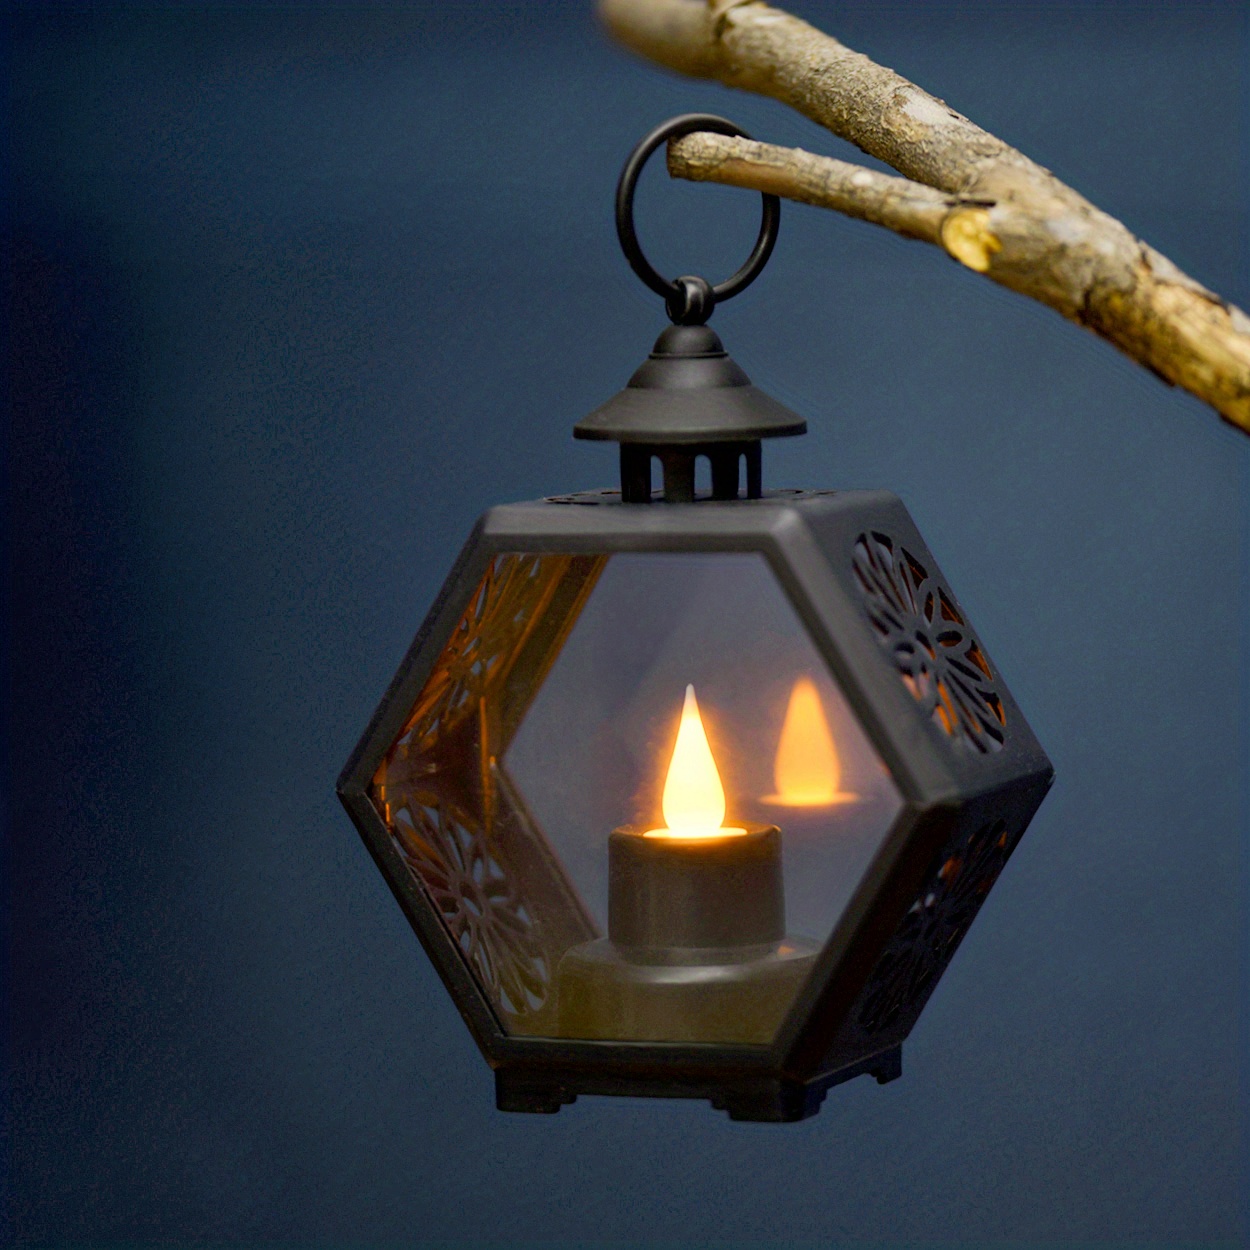 Hanging Candle Lantern Decorative Portable Candle Lamp For Outdoor